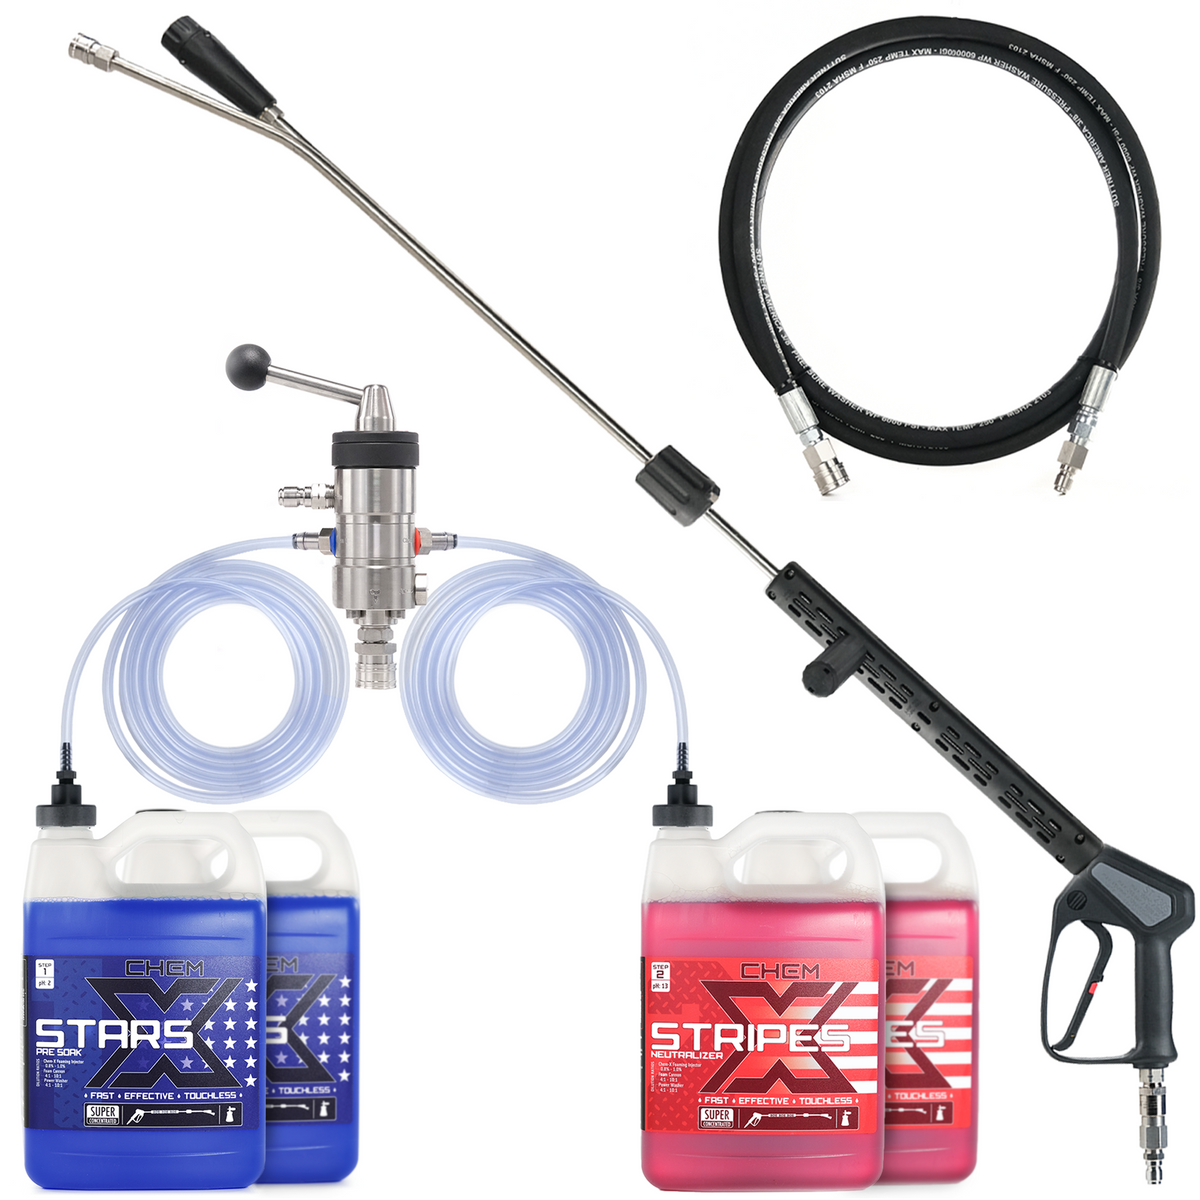 The Complete Touchless Solution Kit - Chem-X